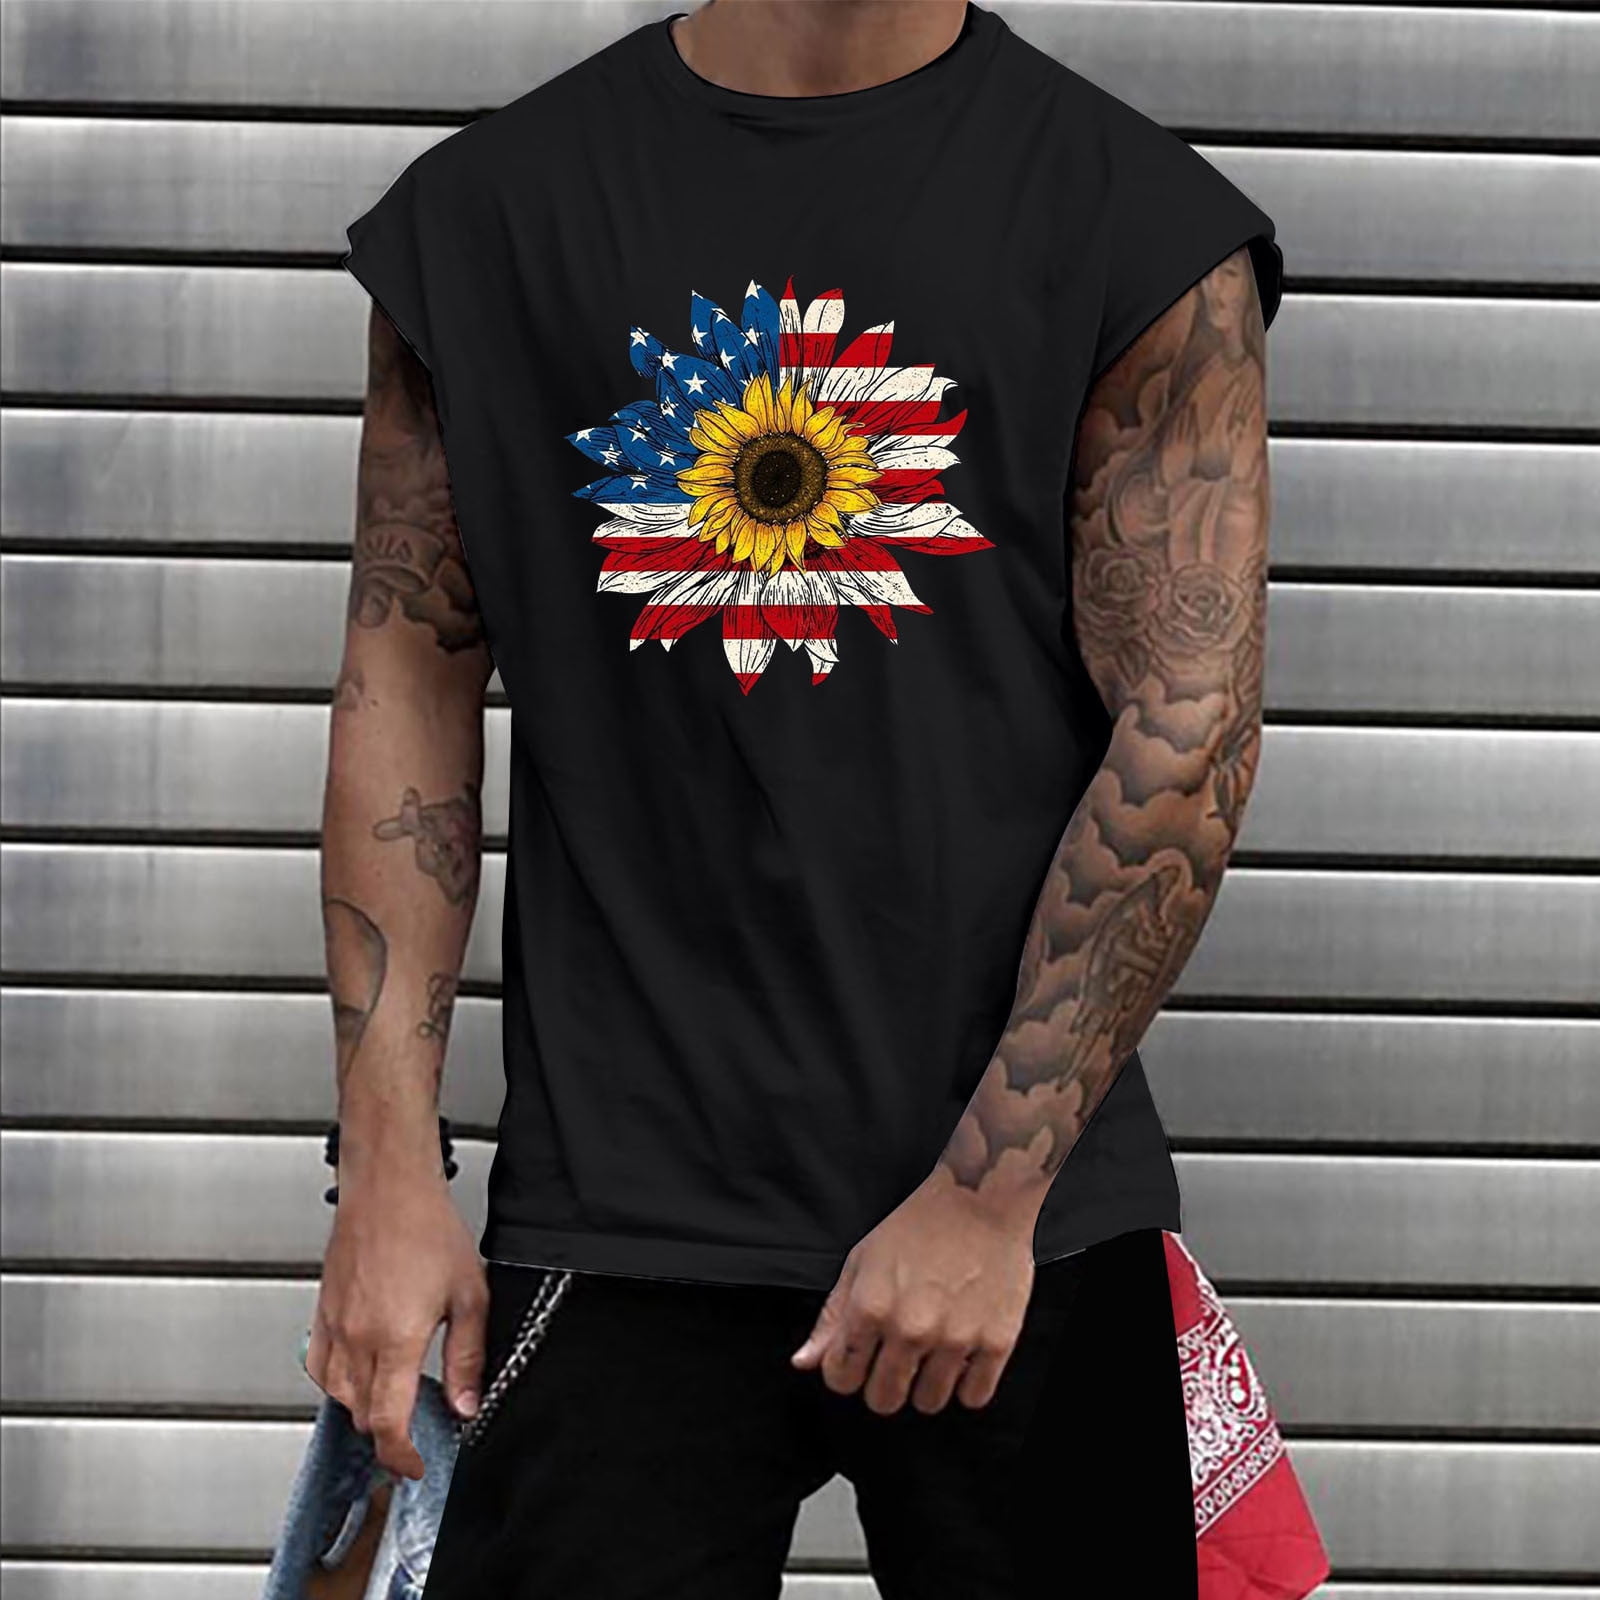 cllios 4th of July Tank Tops for Men Patriotic American Flag Graphic ...